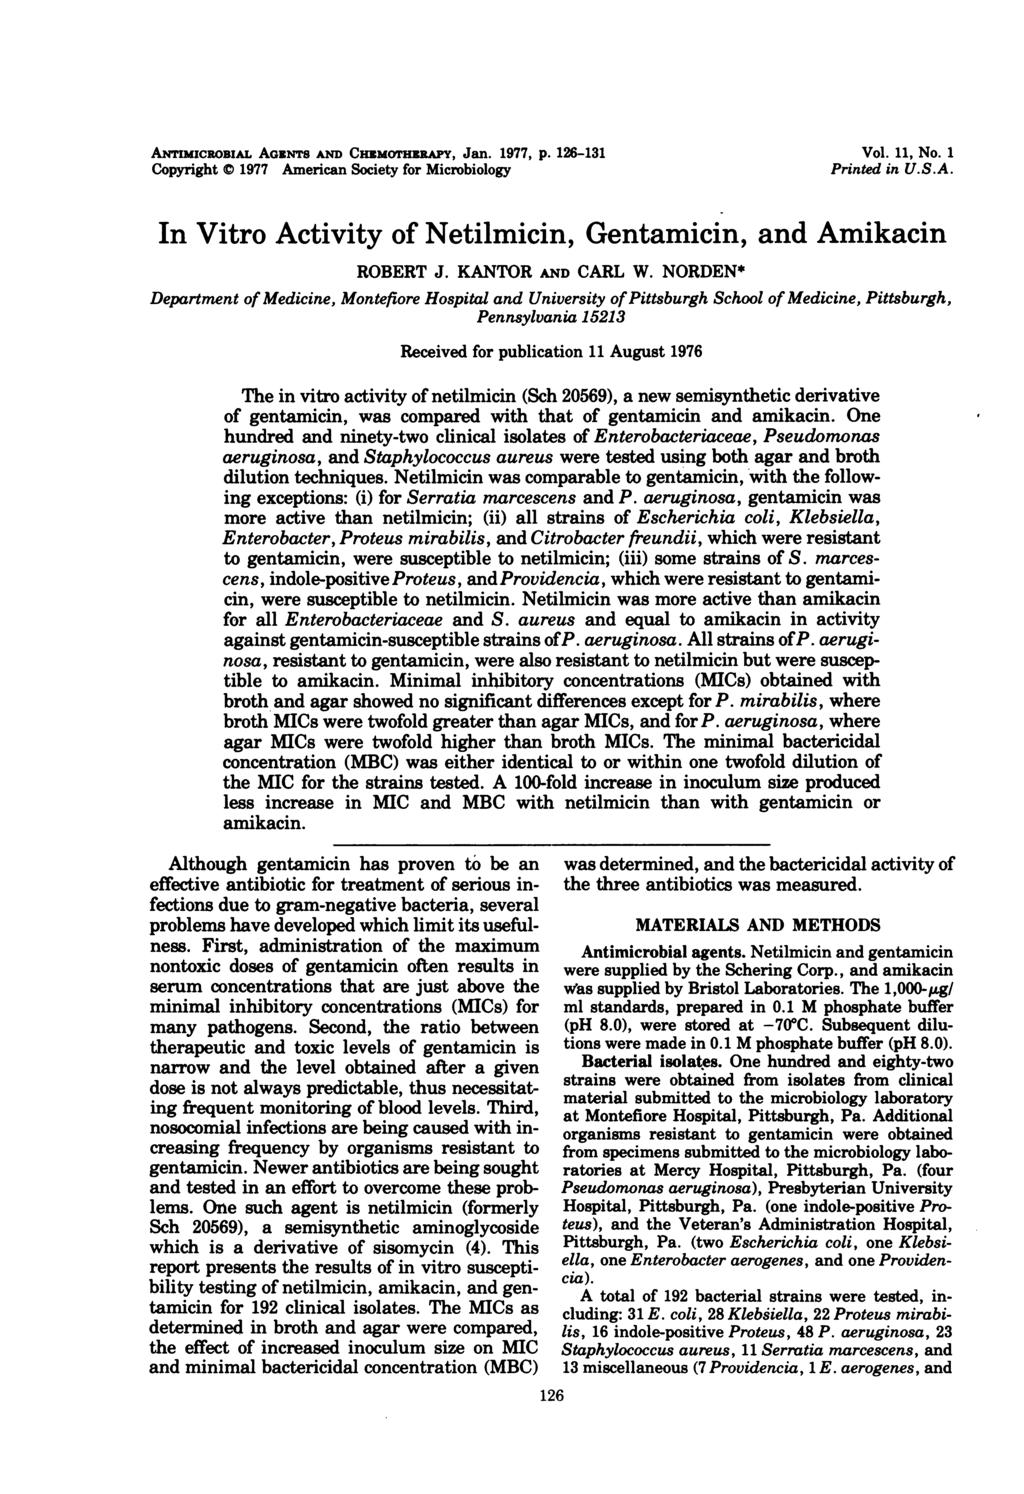 ANTIMICROBIAL AGzNTS AND CHEMOTHERAPY, Jan. 1977, p. 126-131 Copyright X 1977 American Society for Microbiology Vol. 11, No. 1 Printed in U.S.A. In Vitro Activity of Netilmicin, Gentamicin, and Amikacin ROBERT J.